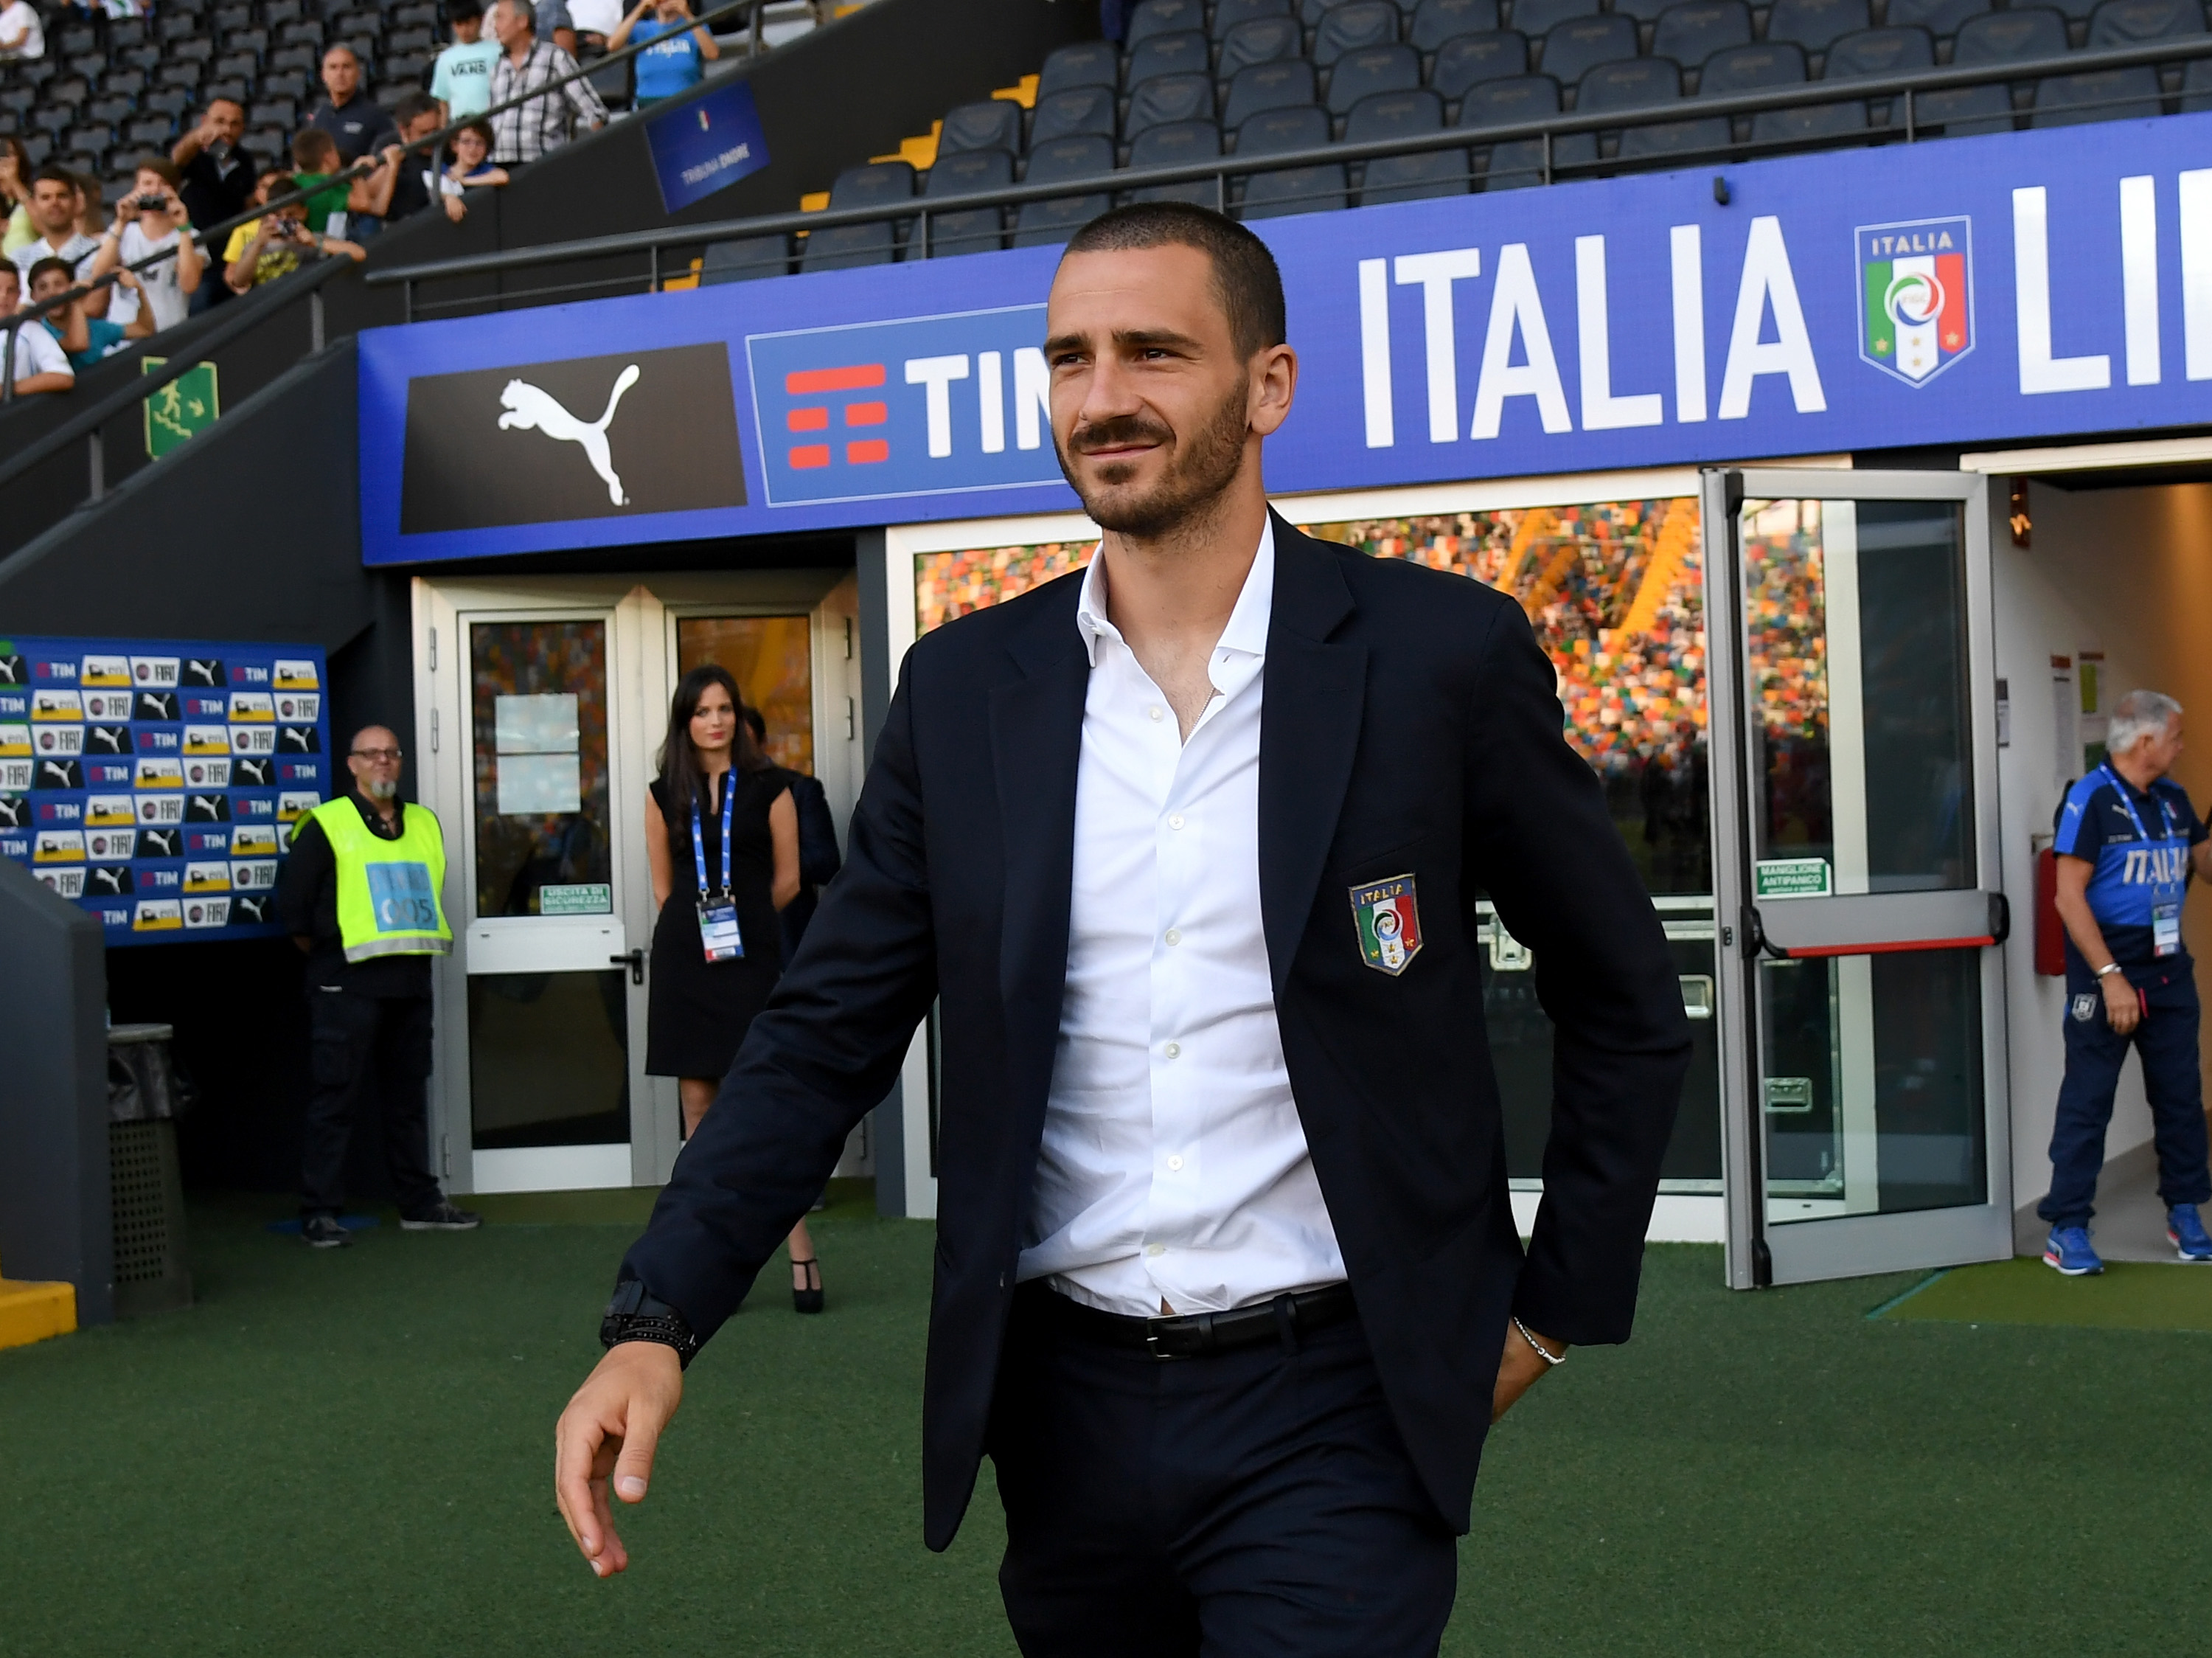 UDINE, ITALY - JUNE 11:  Leonardo Bonucci of Italy looks on prior to the FIFA 2018 World Cup Qualifier between Italy and Liechtenstein at Stadio Friuli on June 11, 2017 in Udine, Italy.  (Photo by Claudio Villa/Getty Images)